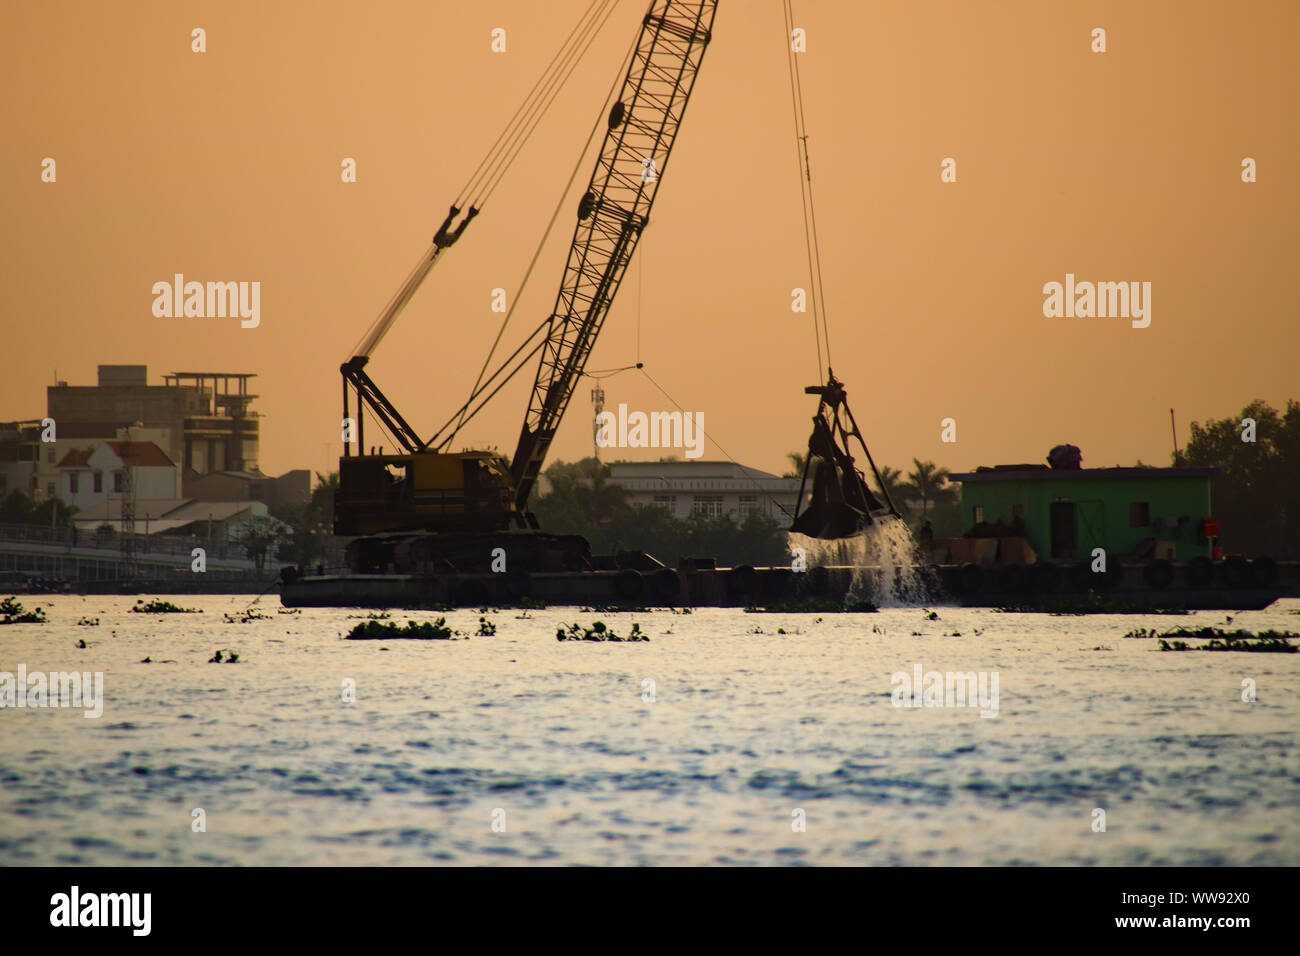 Silhouette of a heavy lift crane taking out something from the river surface of Mekong Delta, Vietnam Stock Photo